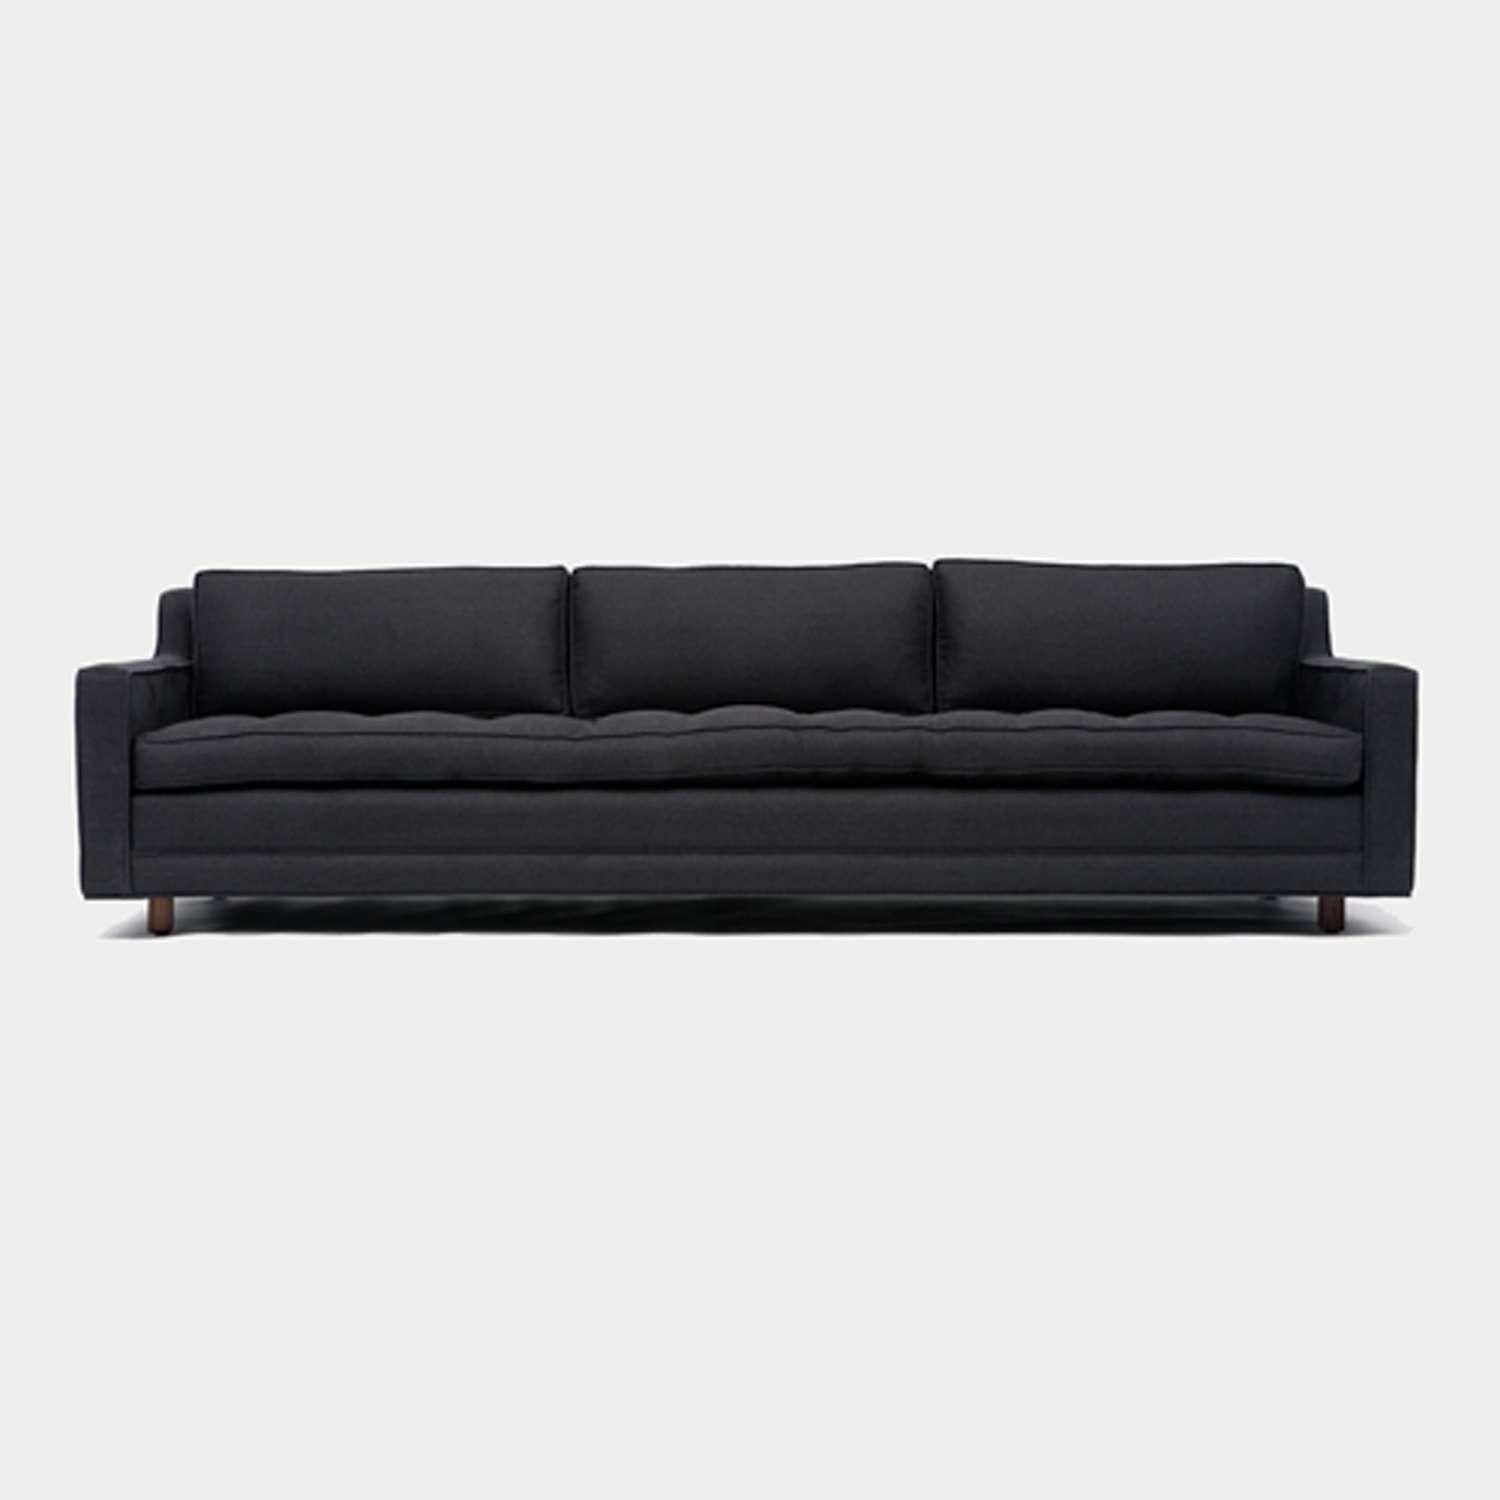 Up Three Seater Sofaartless | Yliving For Large 4 Seater Sofas (View 13 of 20)